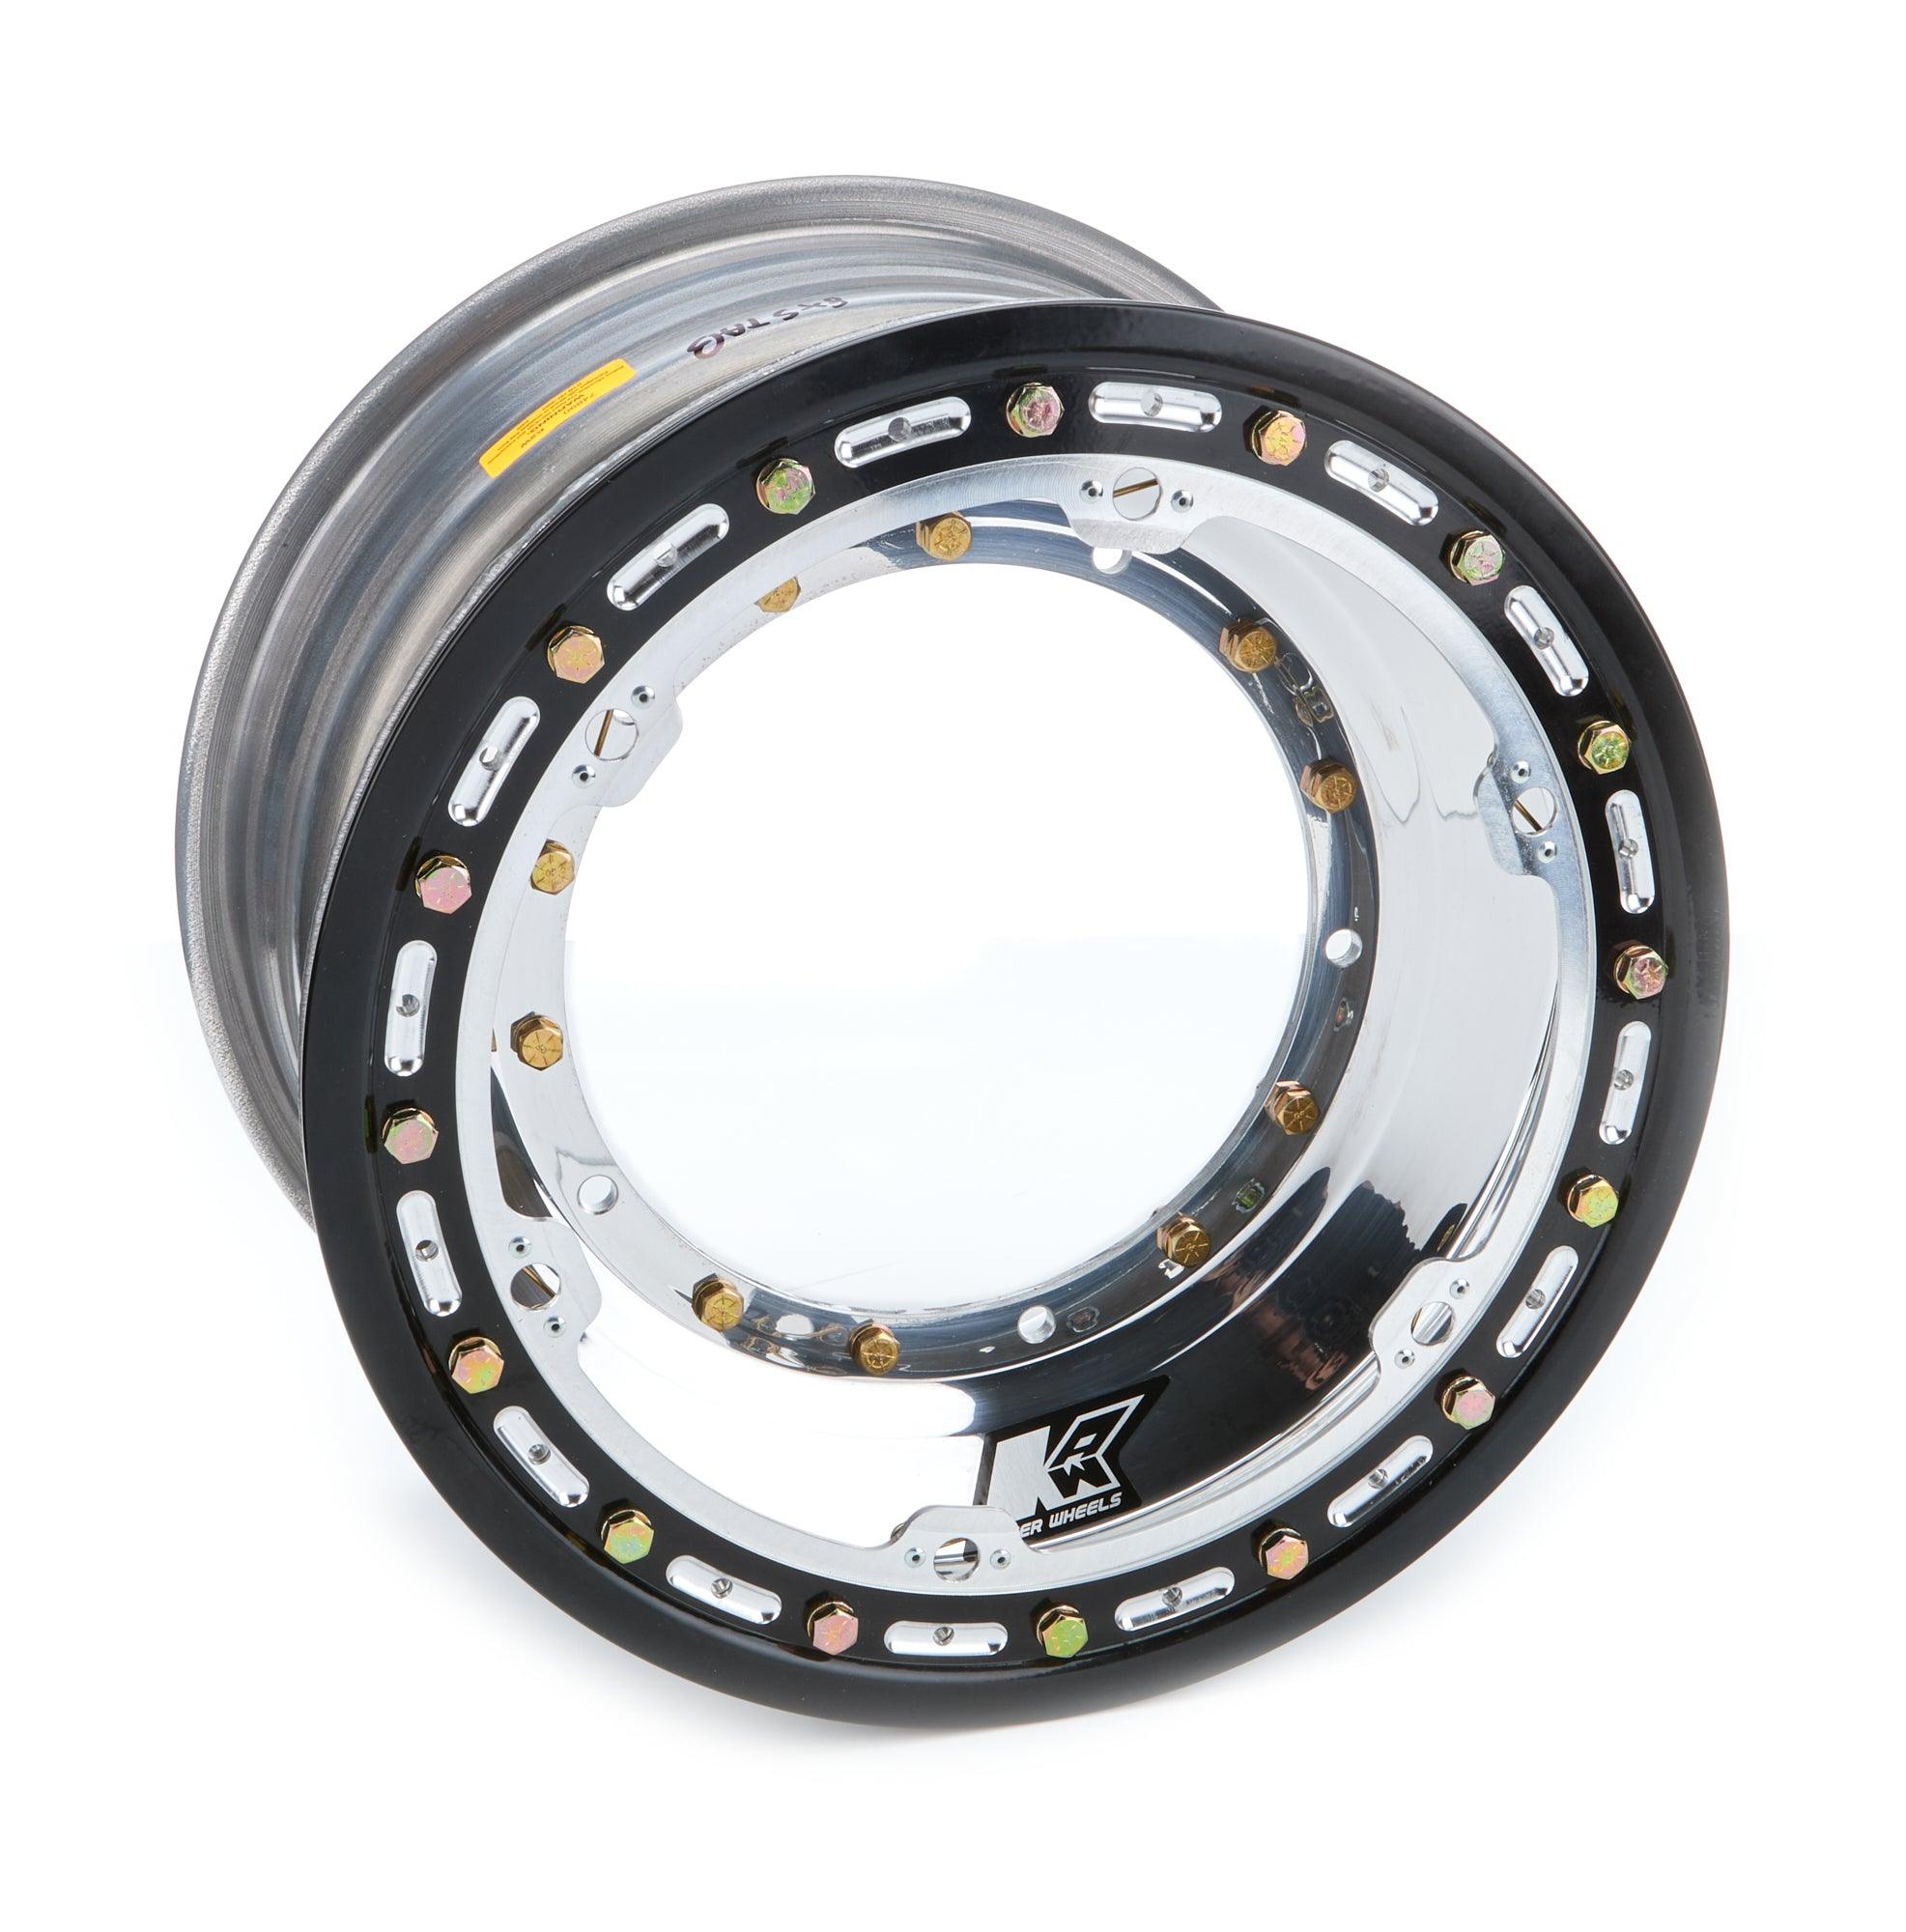 Direct Mnt Wheel B/L 15x 8 4in bs - Burlile Performance Products